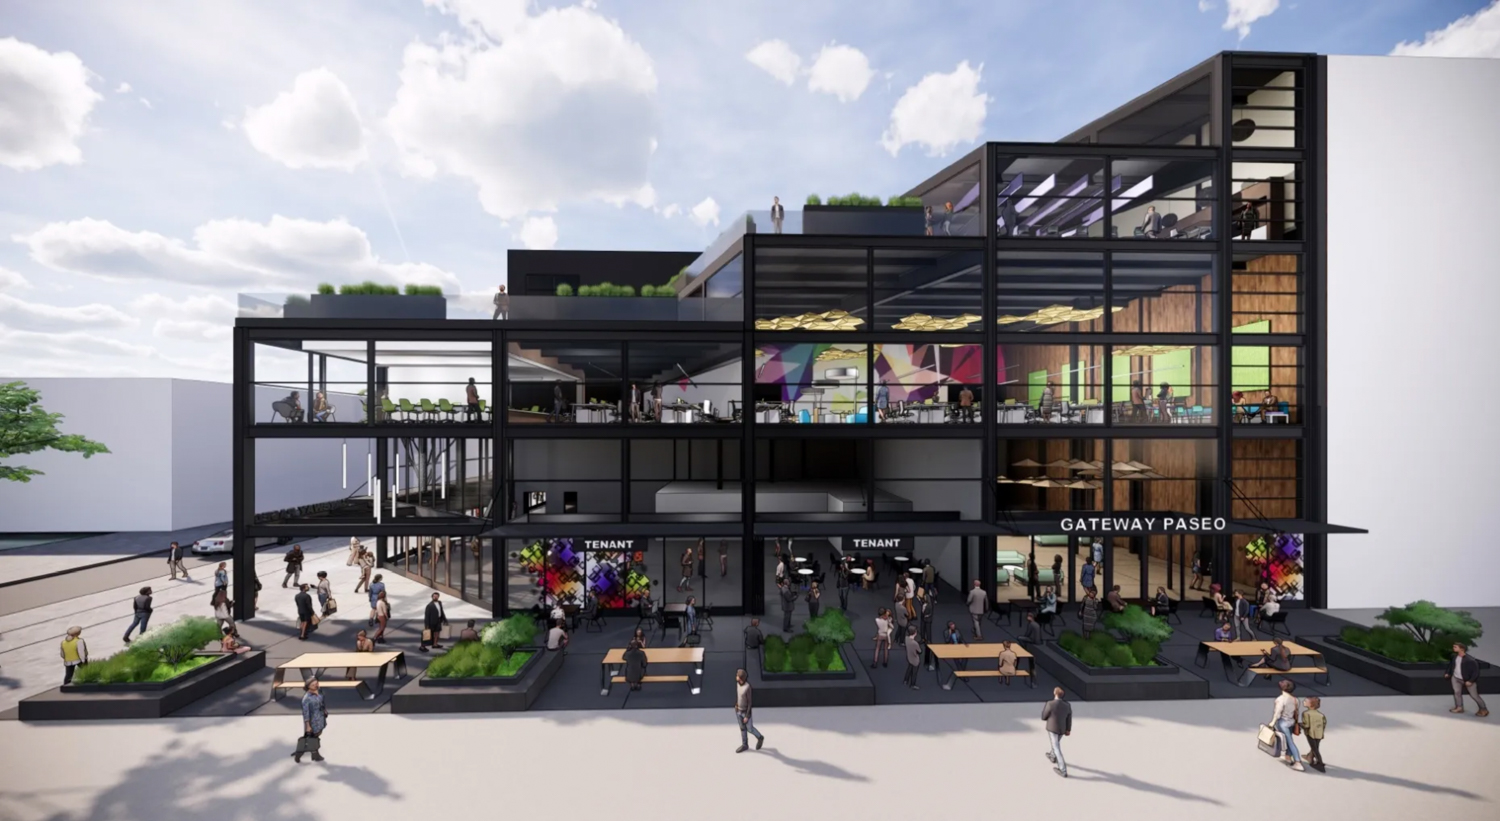 Paseo perspective along Restaurant Row, rendering by HGA Architecture